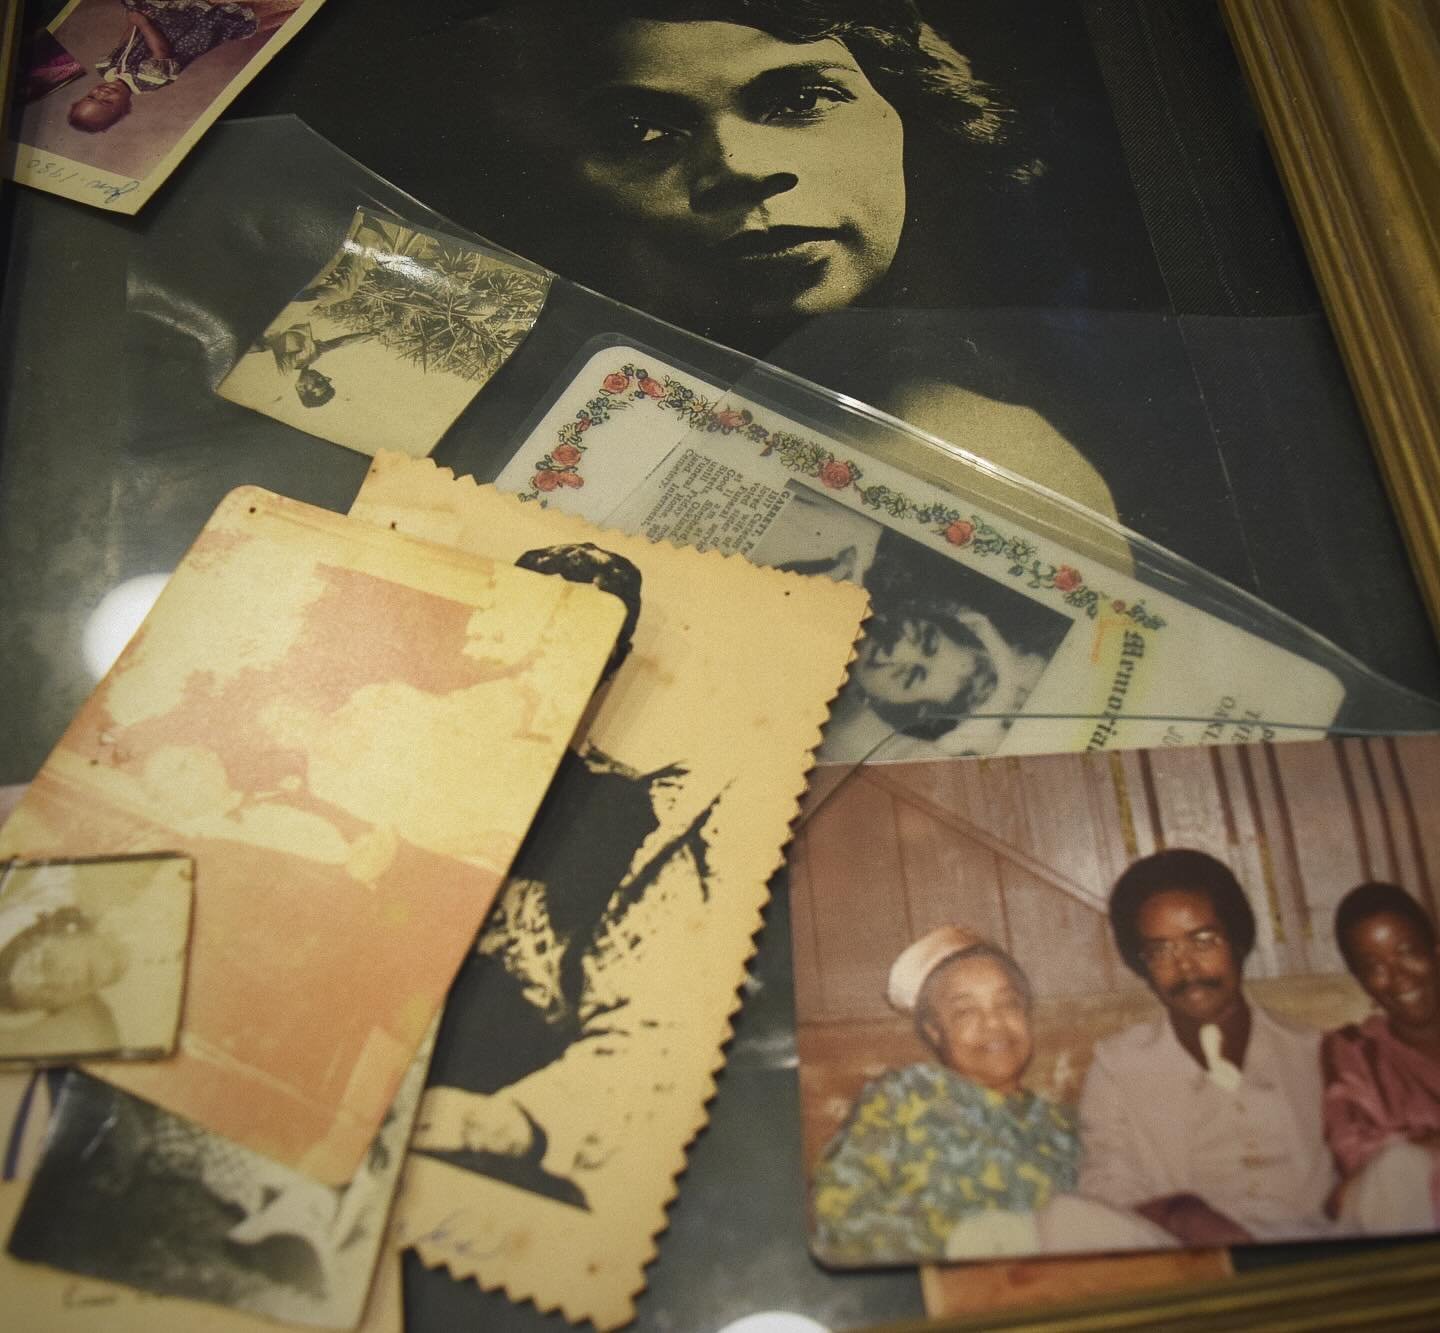 A photograph is worth 1,000 words. 

Carrying your family legacy forward and knowing where your ancestors come from is meaningful. Yet there is a lot of mystery for some people.

It is a privilege to have a home, a safe space to store treasures that 